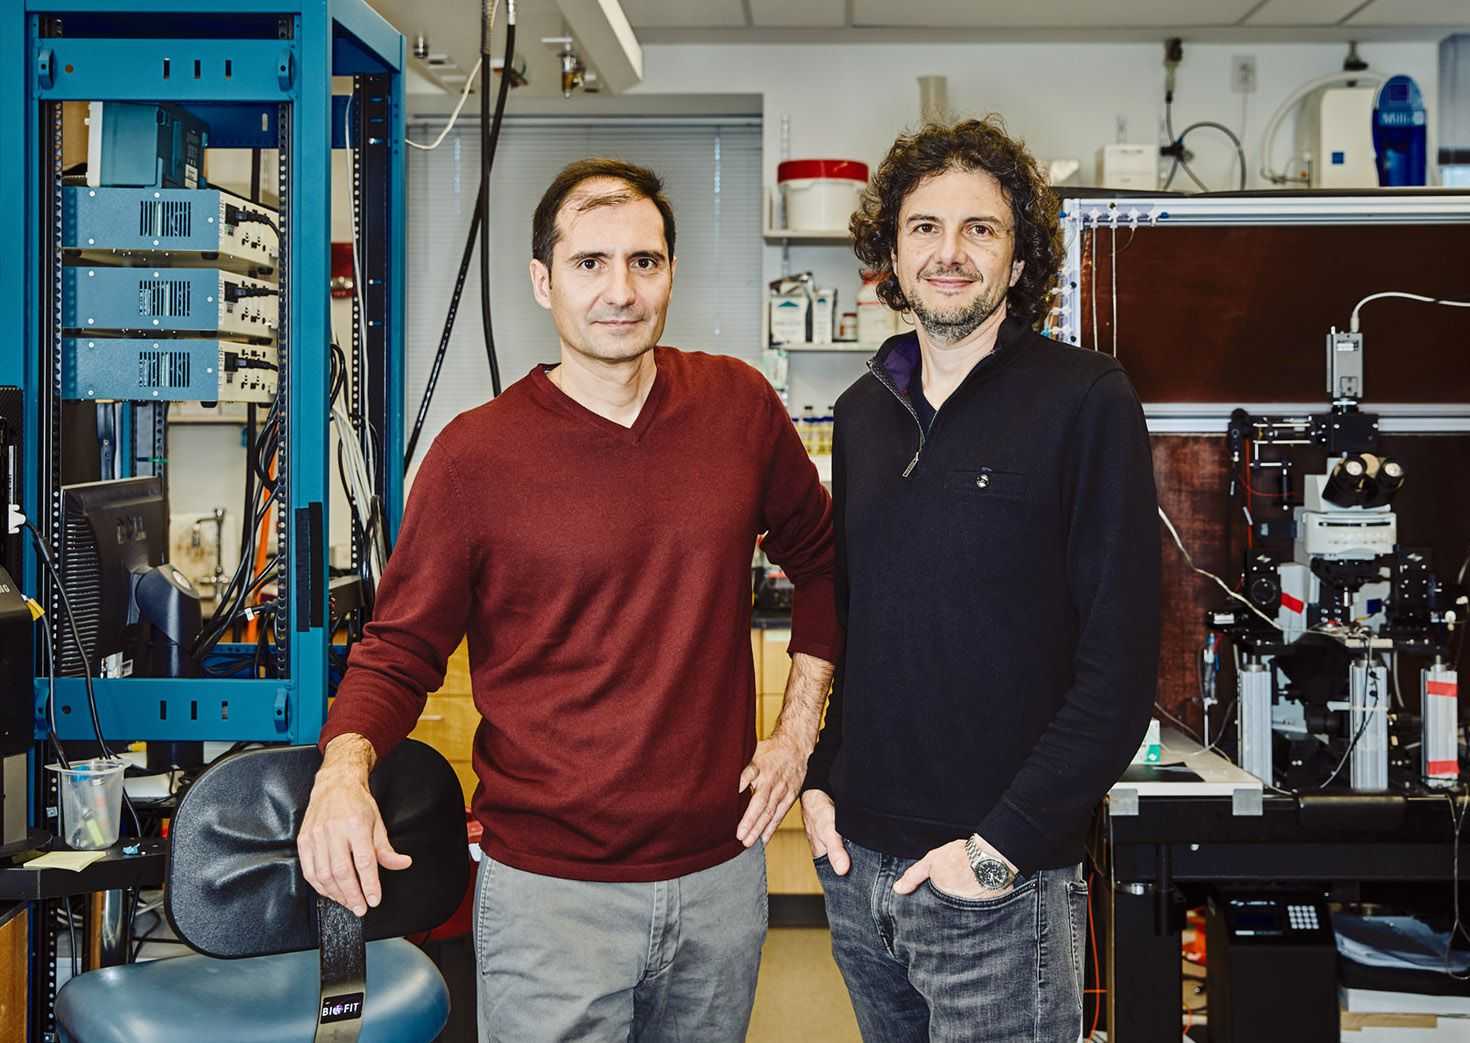 David Sabatini (right) and his brother, Bernardo, a neuroscience professor at Harvard who has been a vocal supporter of David since his career imploded, including on social media.  